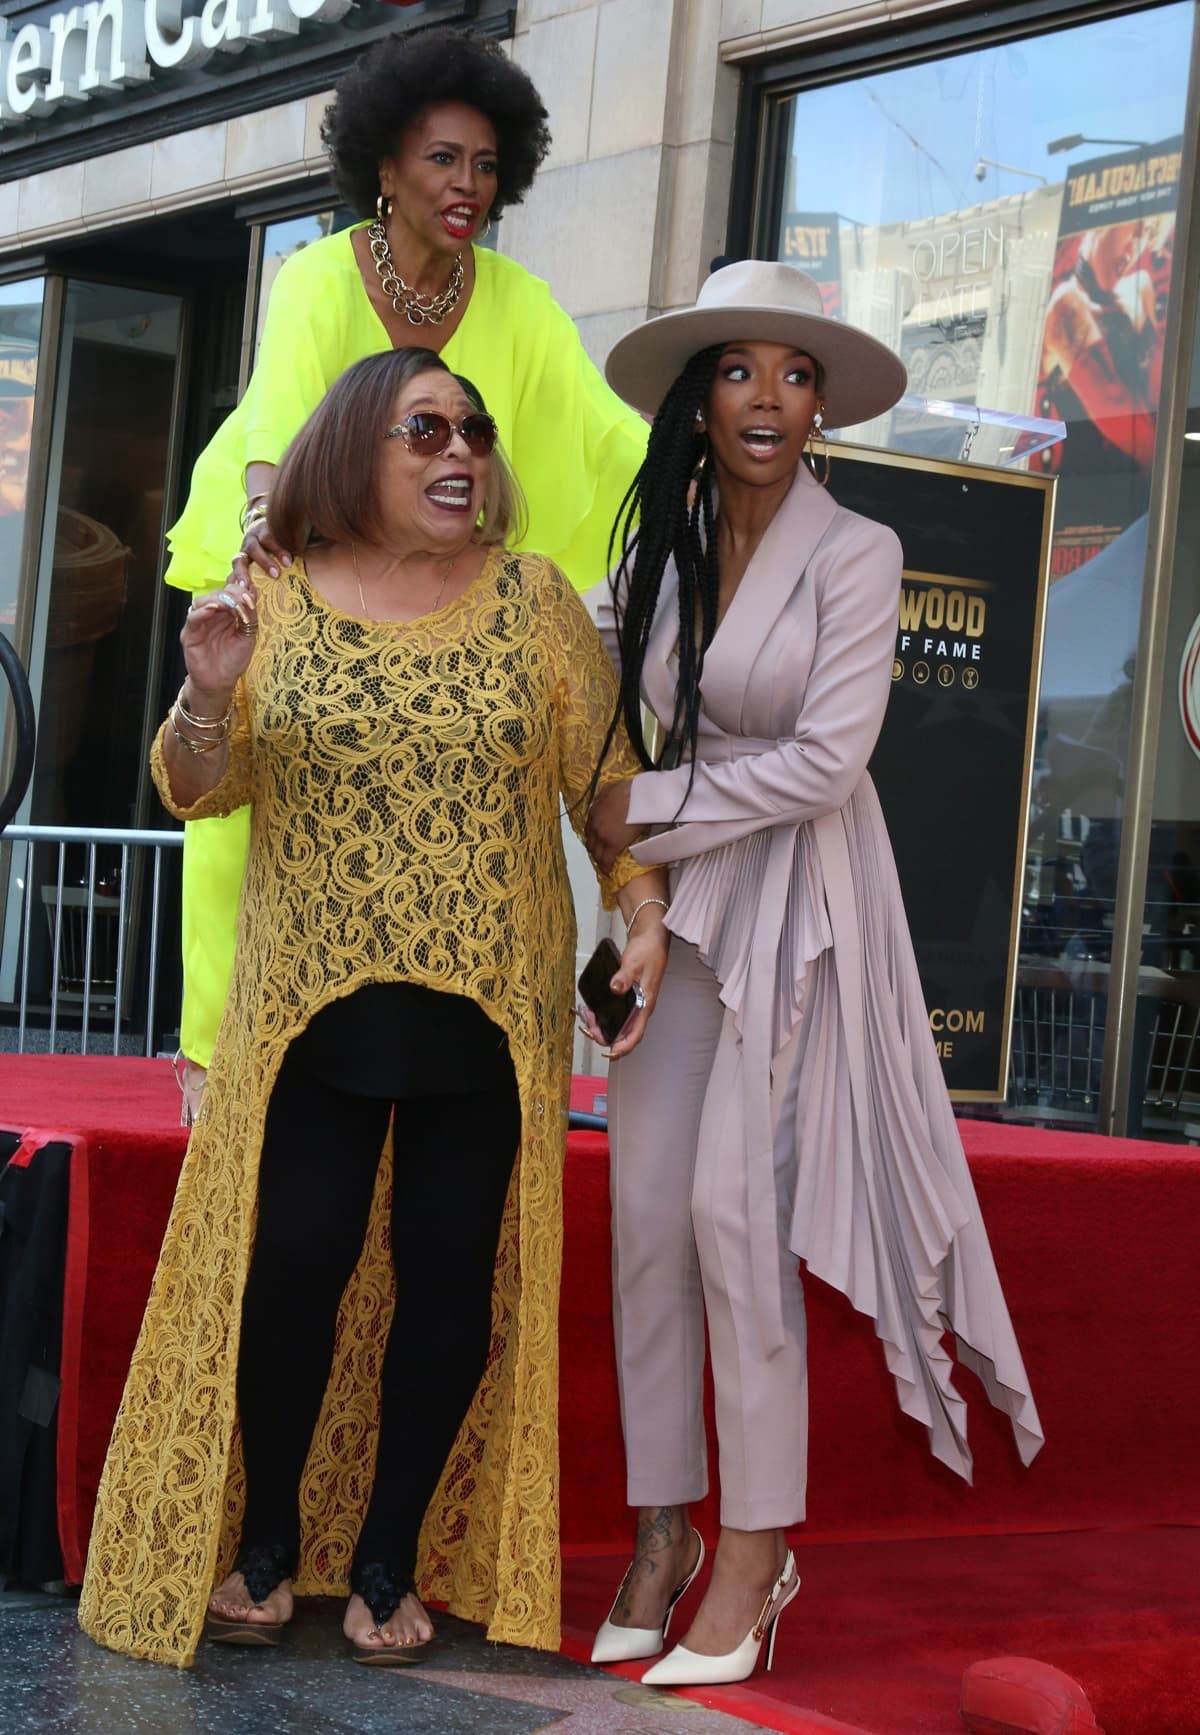 Brandy Norwood, Jenifer Lewis, and Roz Ryan attend the Hollywood Walk of Fame Star Ceremony for Jenifer Lewis at Hollywood Walk of Fame